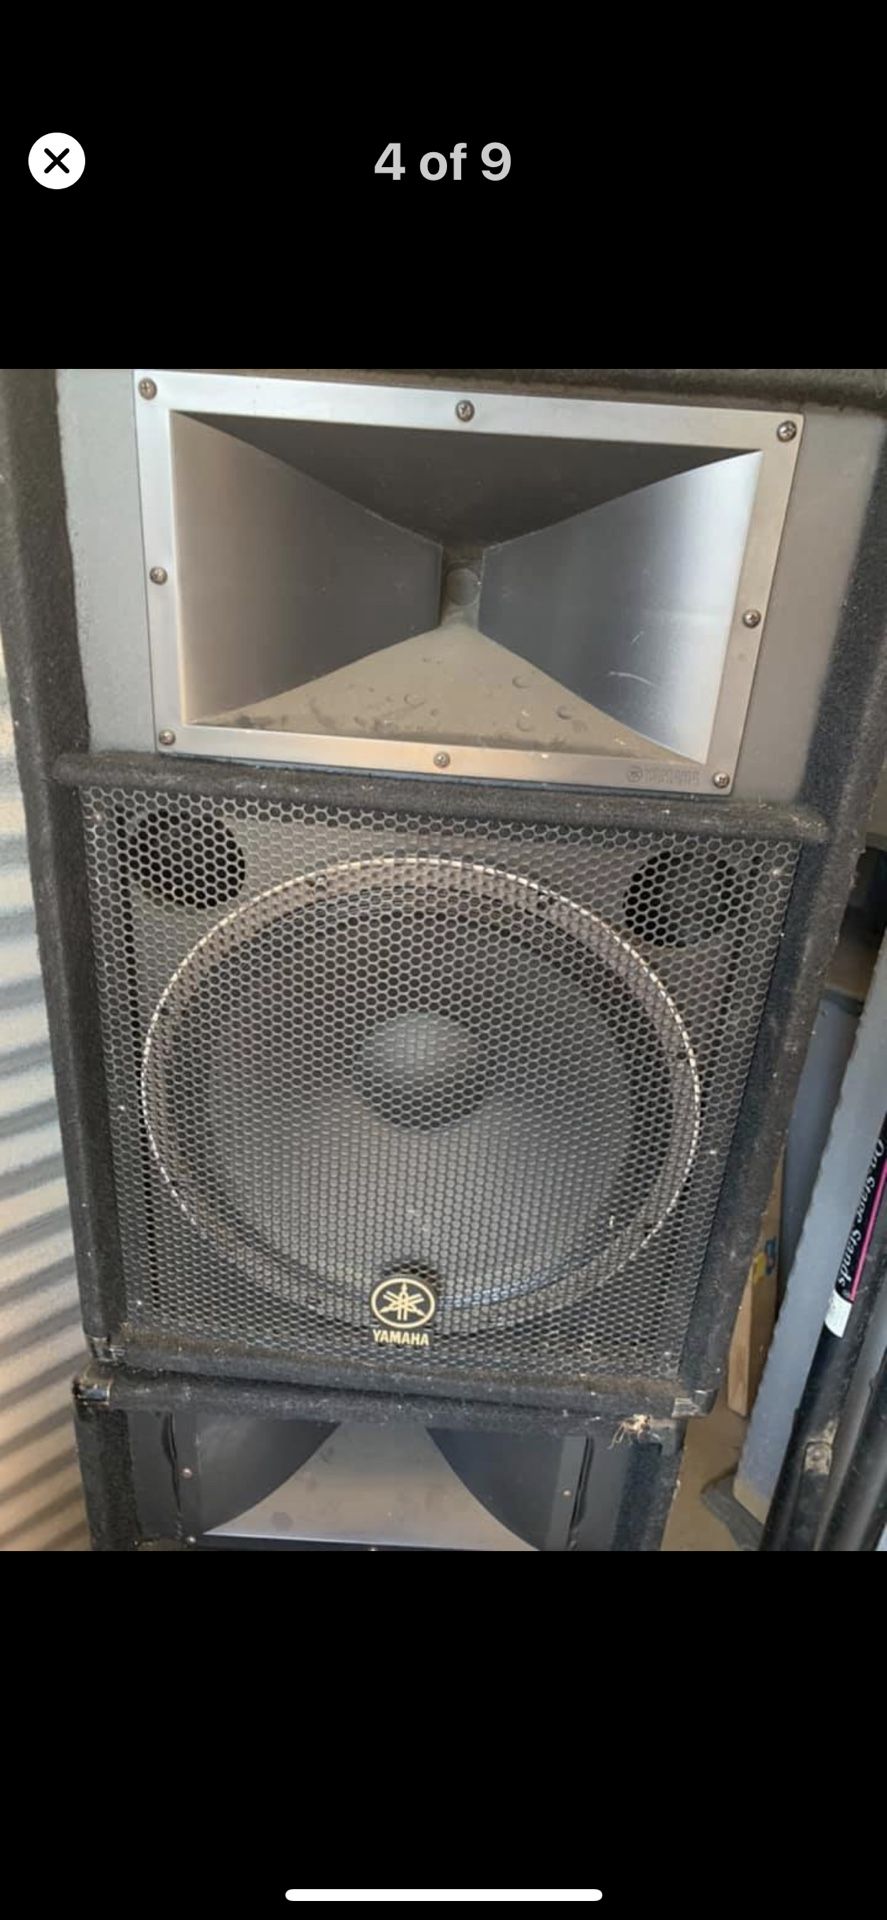 2 Yamaha speakers $350 obo cash only no trades no low ballers